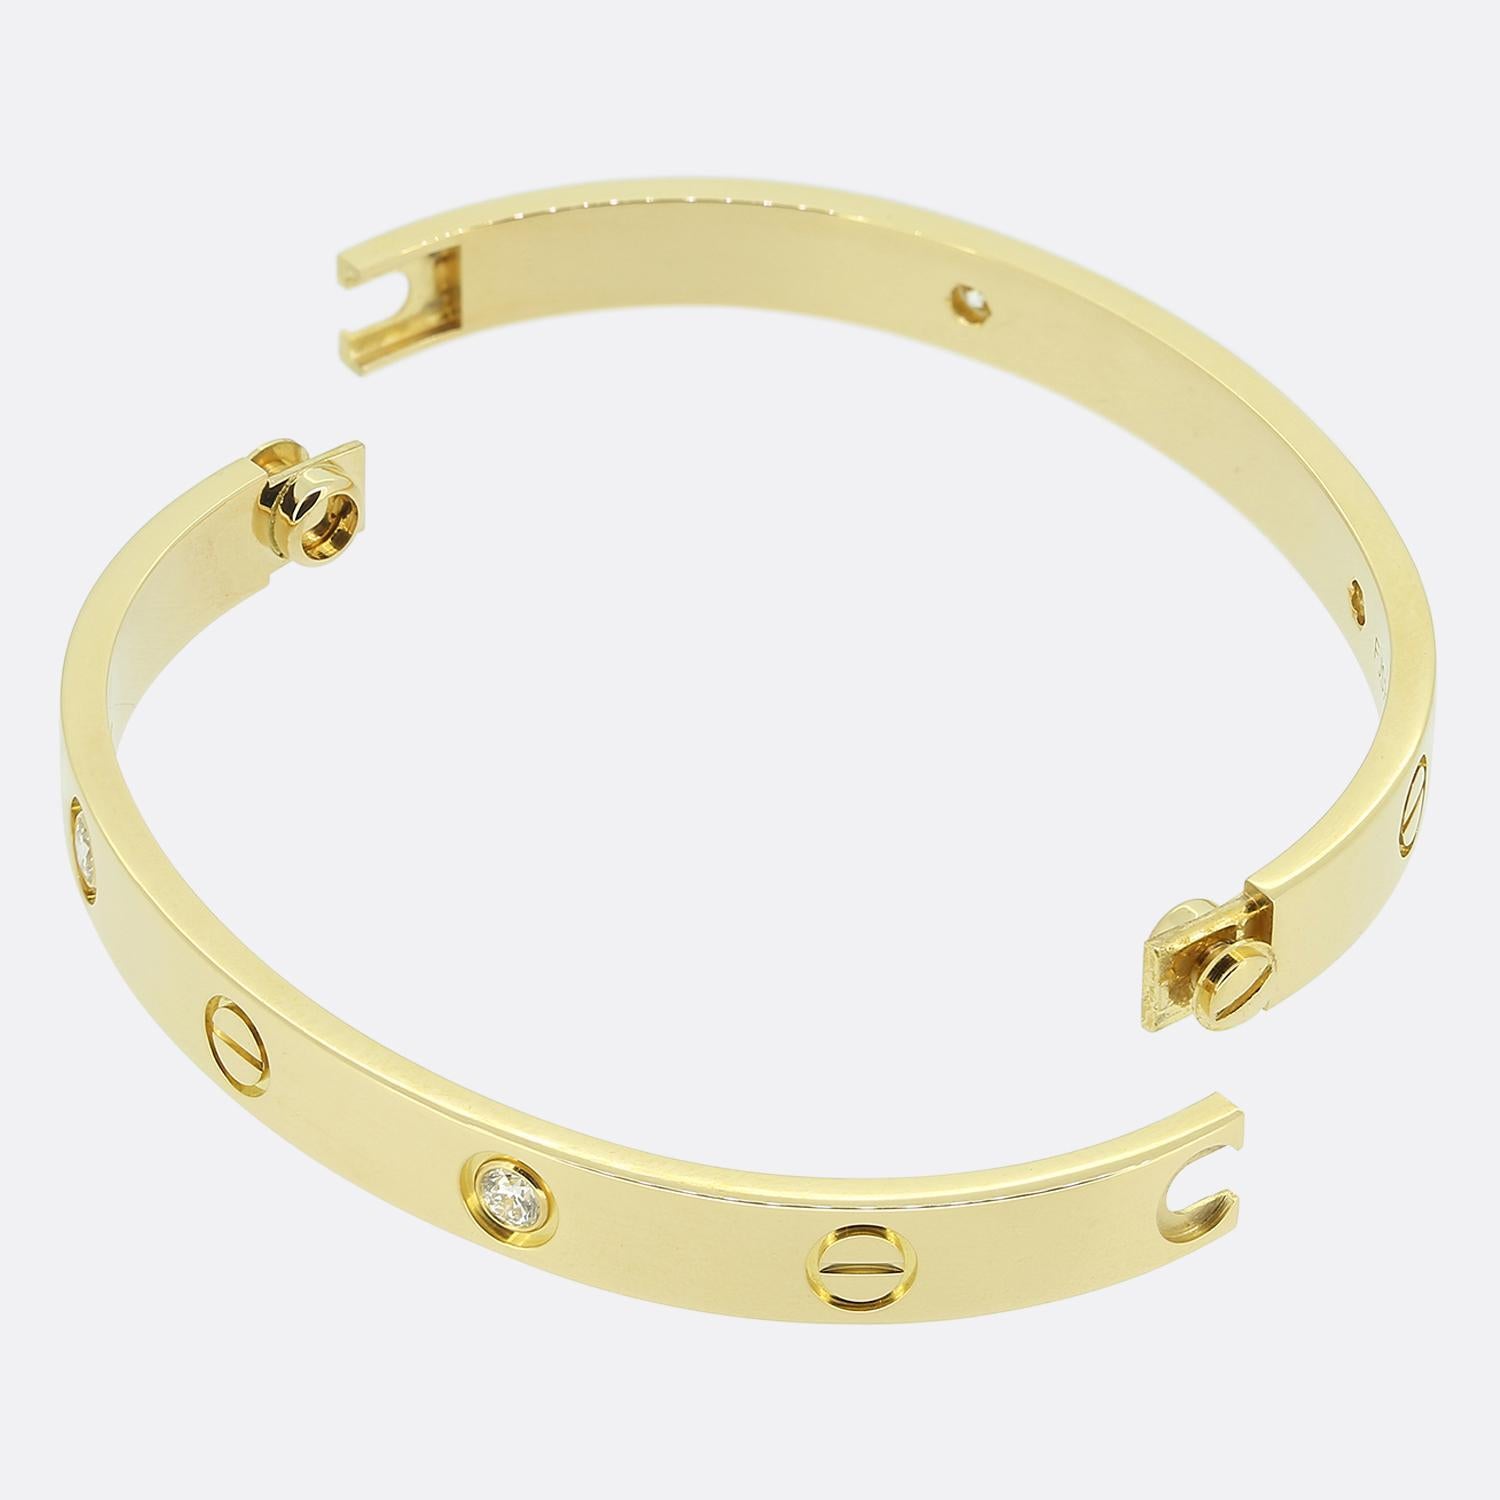 This is an 18ct yellow gold bangle from the world renowned luxury jewellery house of Cartier. This bangle forms part of the LOVE collection and features four round brilliant cut diamonds alongside the iconic screw motif.

